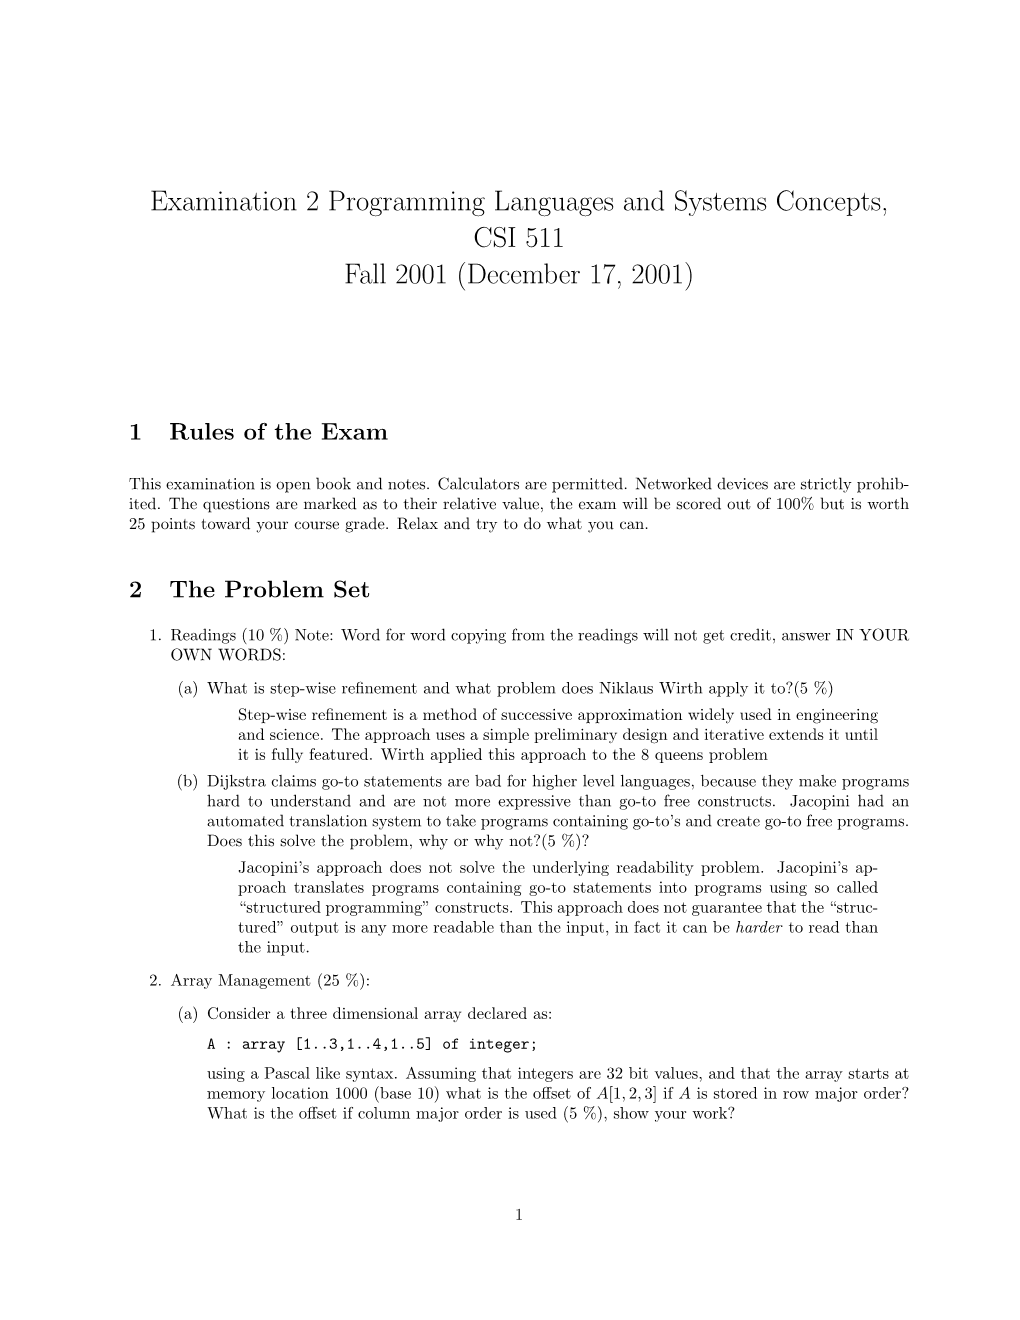 Ination 2 Programming Languages and Systems Concepts, CSI 511 Fall 2001 (December 17, 2001)